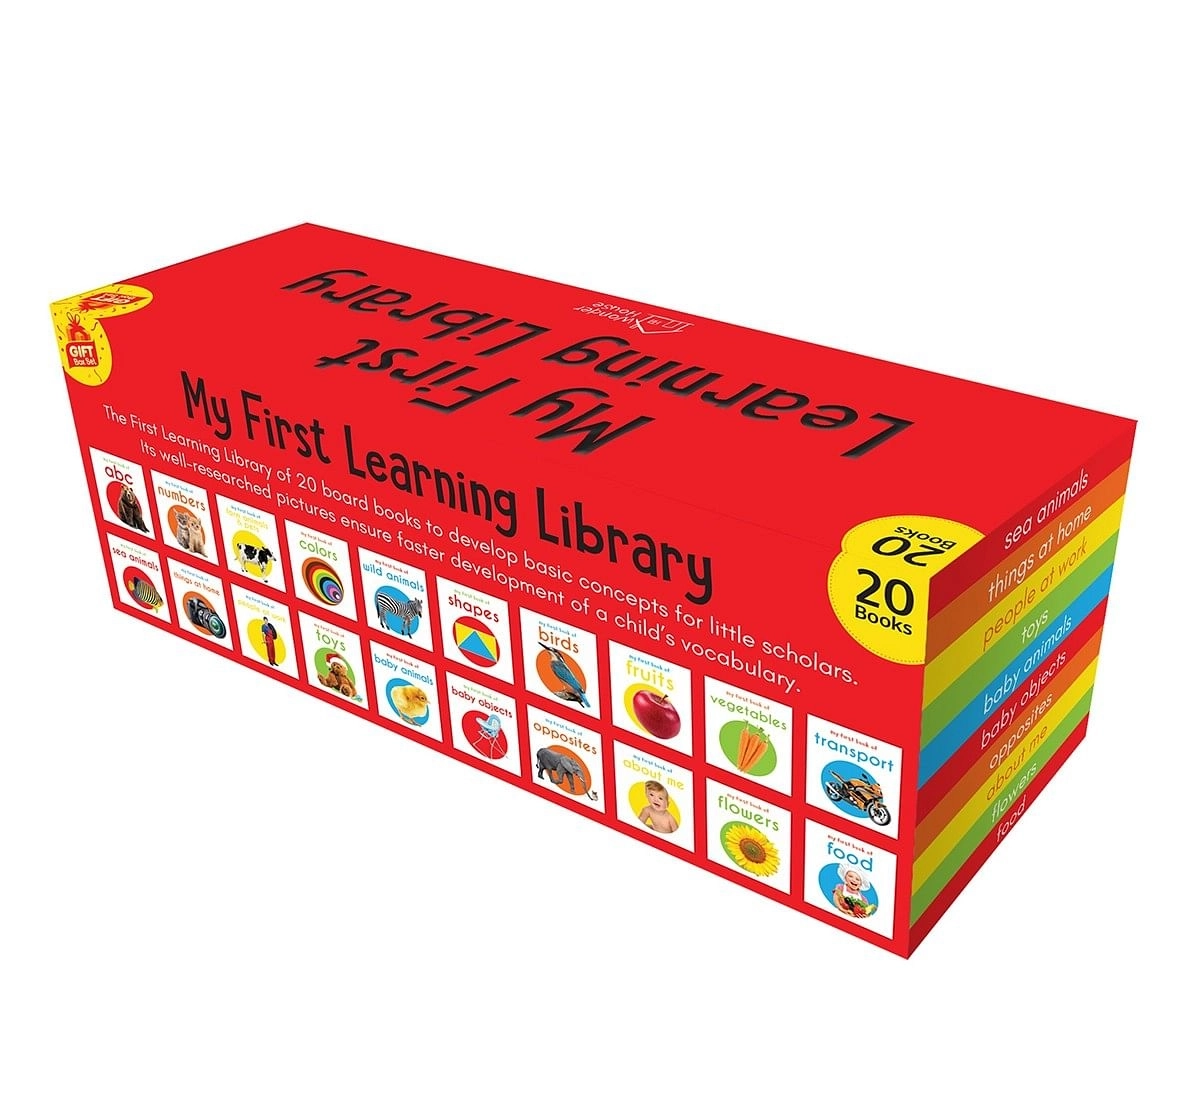 My First Learning Library: Boxset Of 20 Board Books Gift Set For Kids, 440 Pages Book By Wonder House Books, Box Set